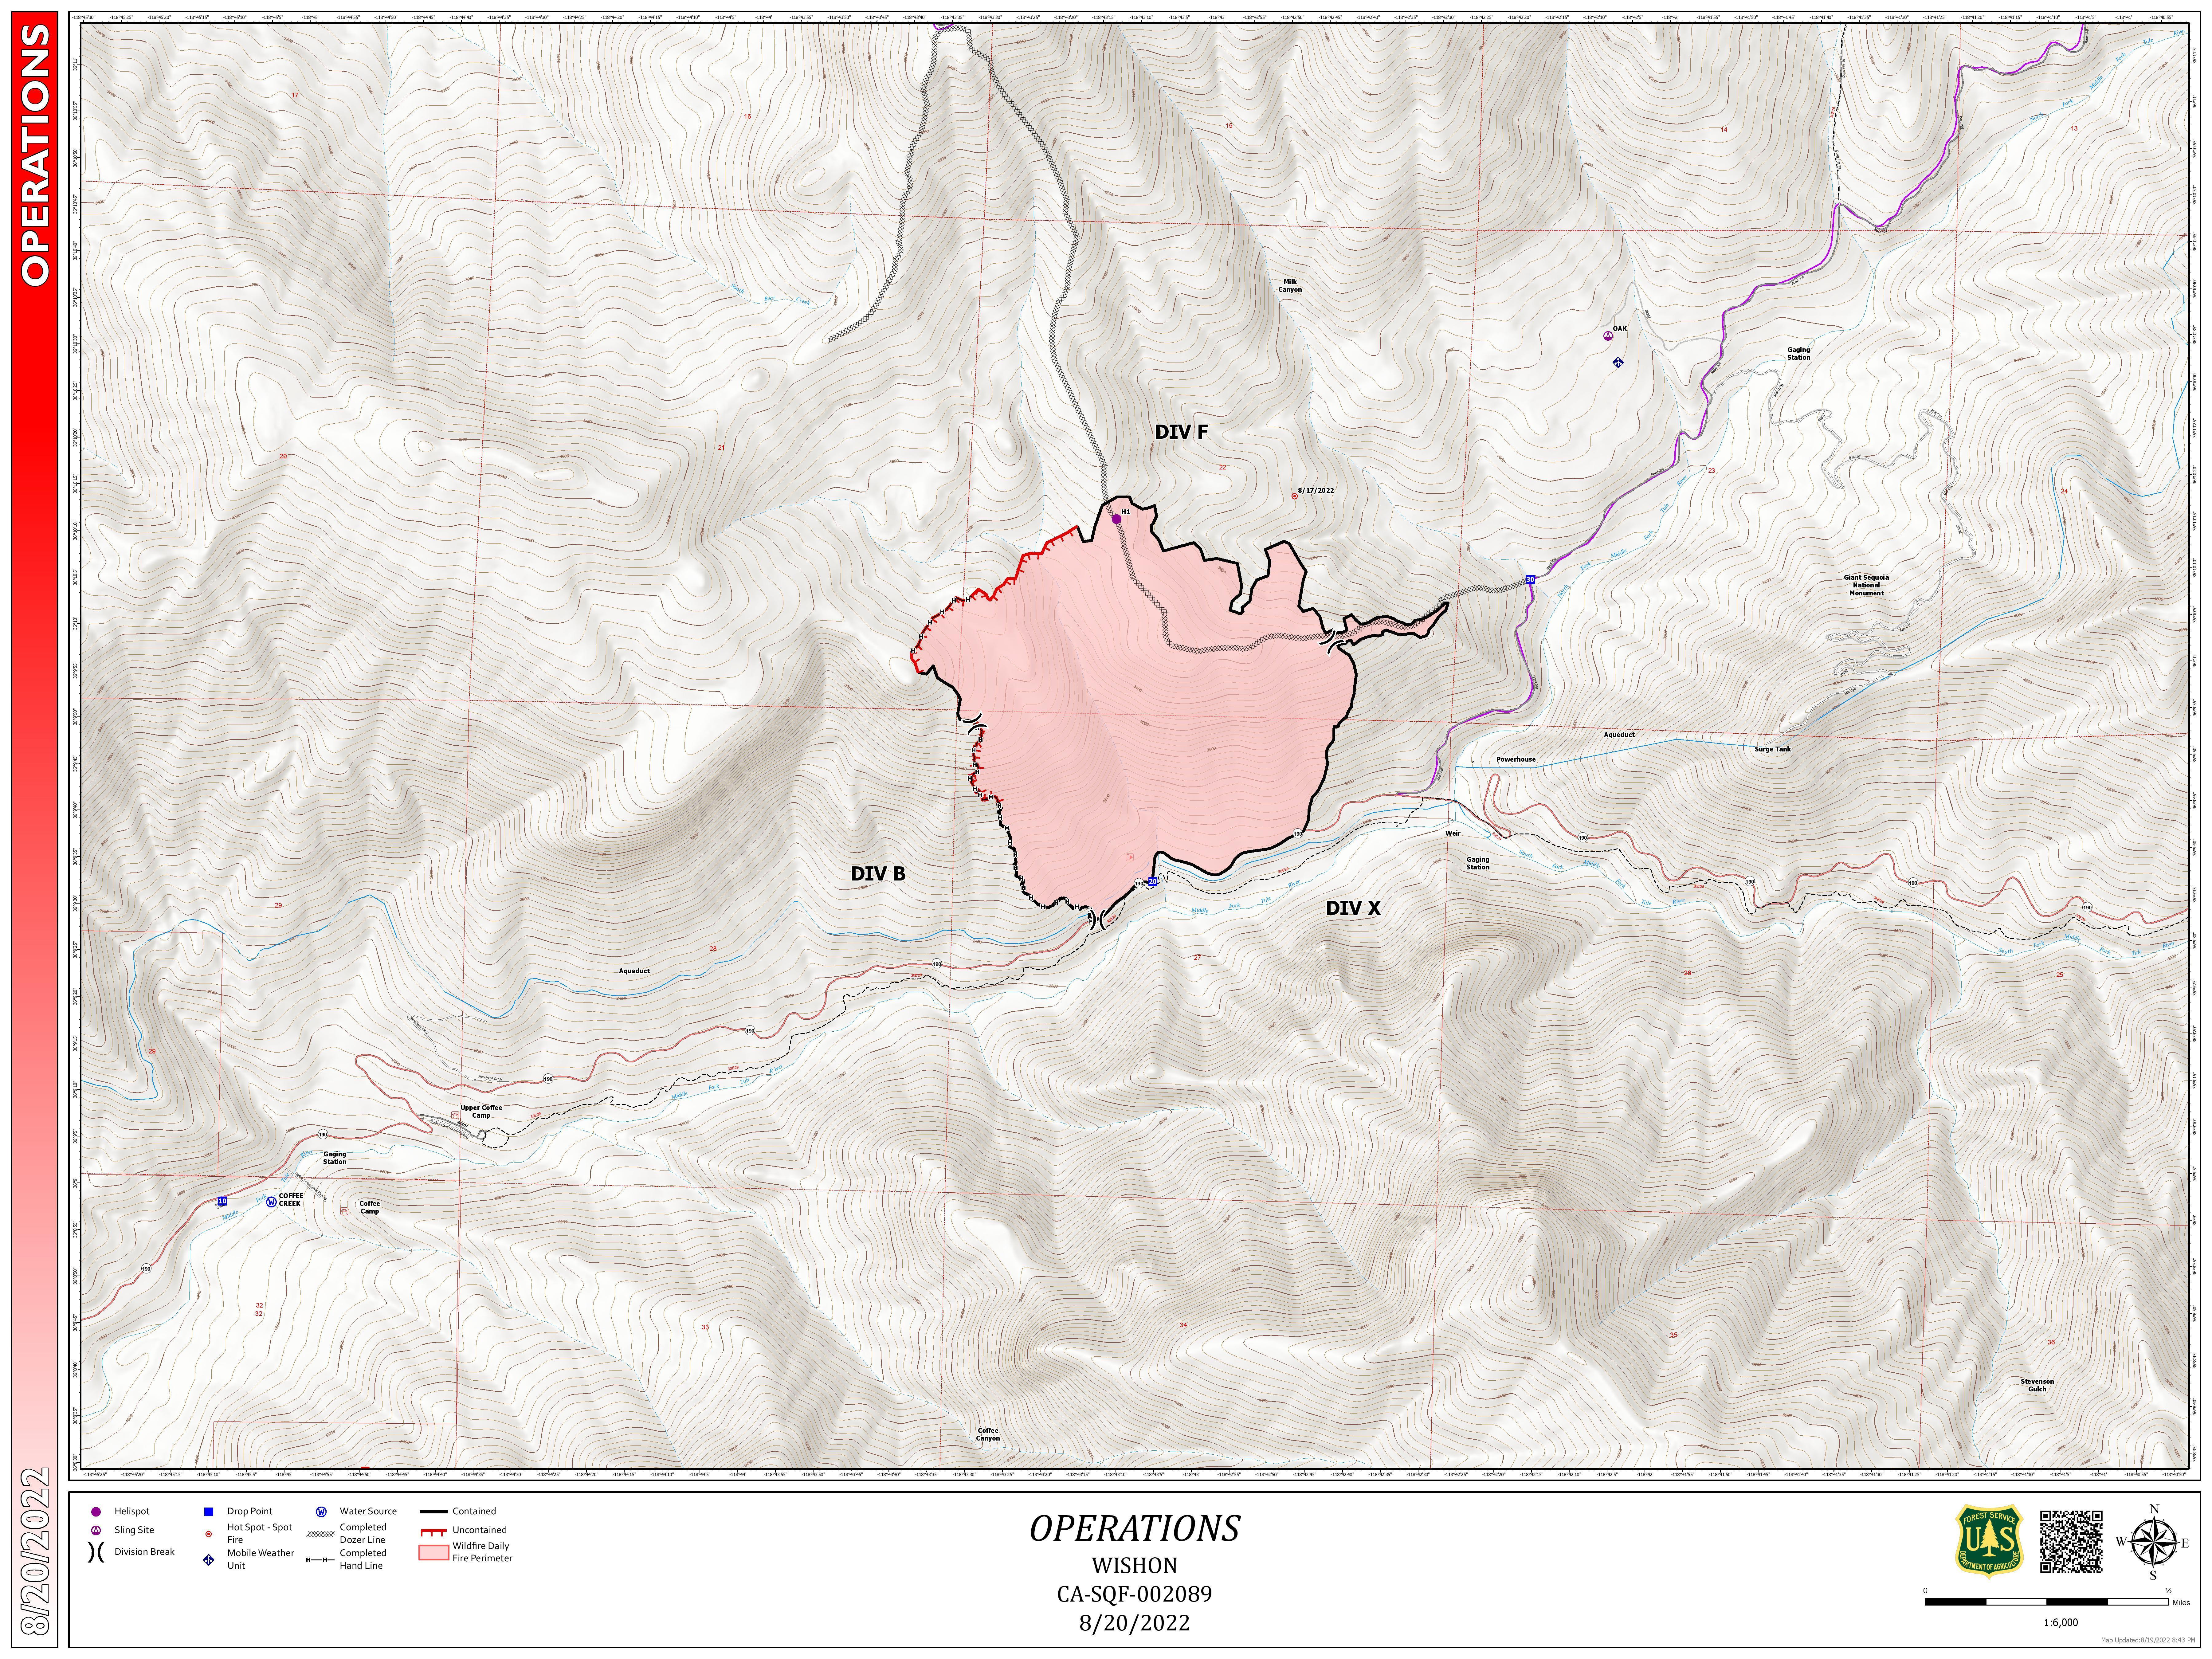 Wishon Fire Operations Map August 20, 2022